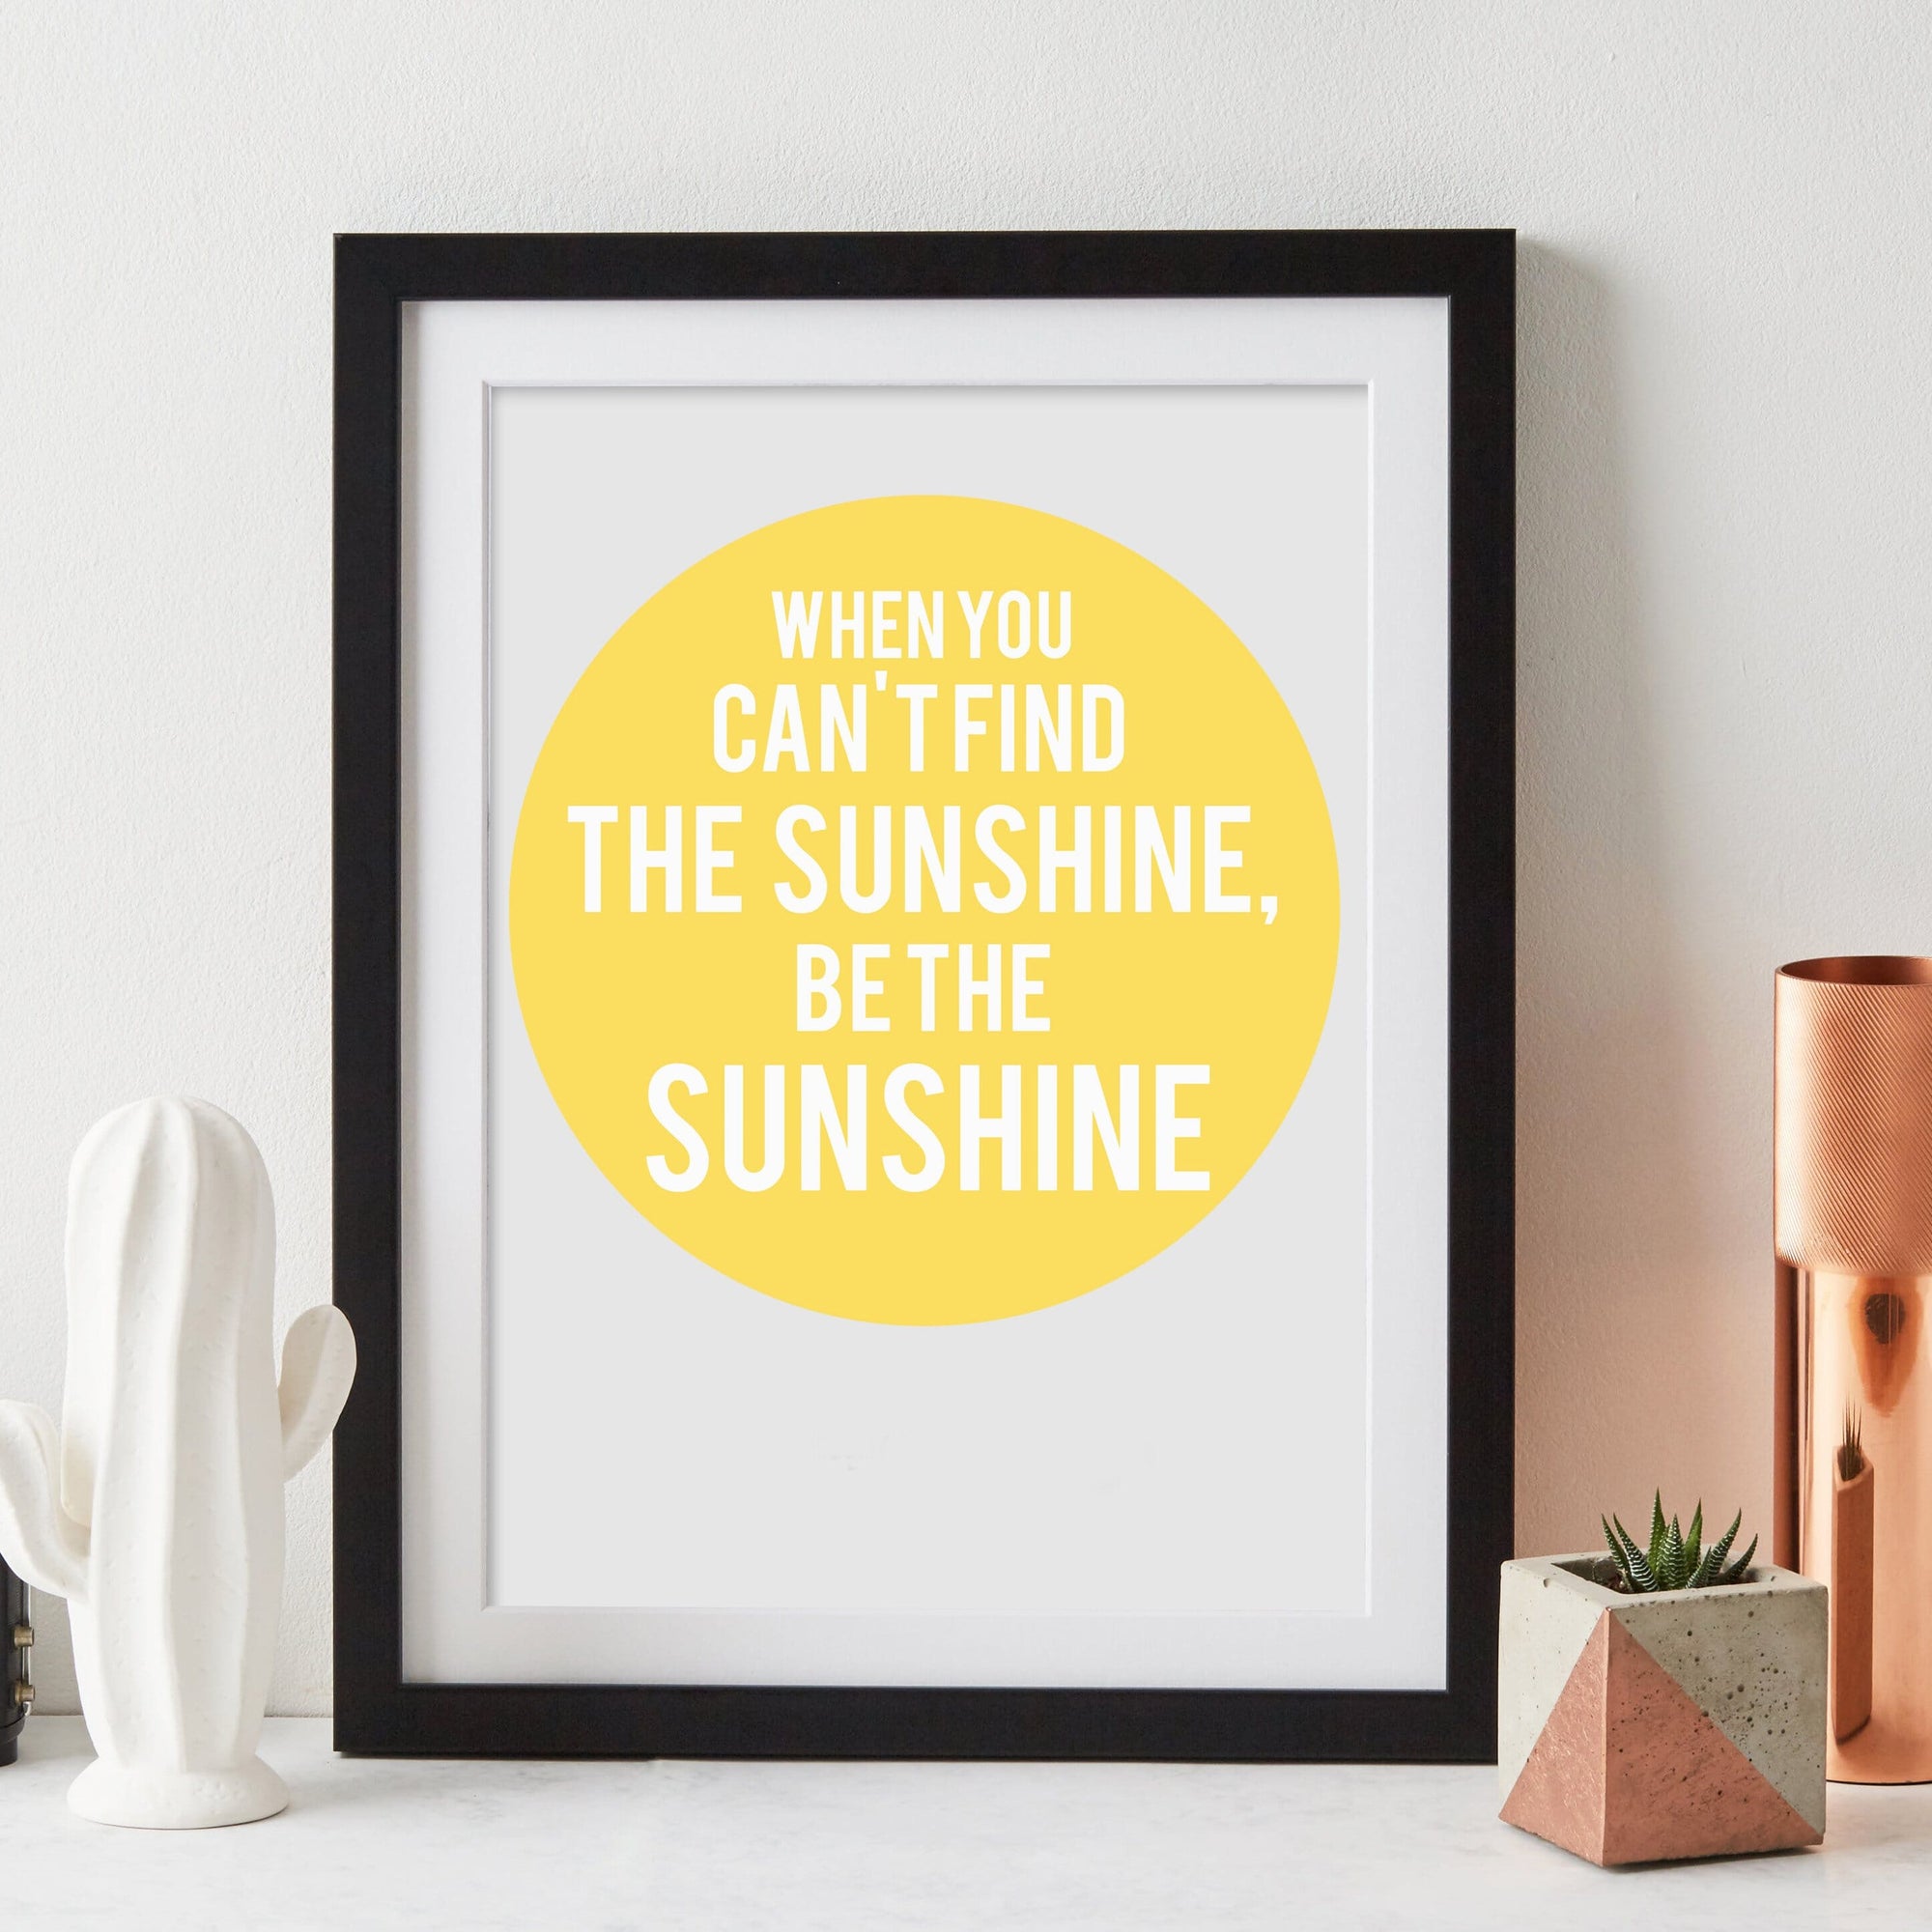  framed print with personalised text on a coloured circle